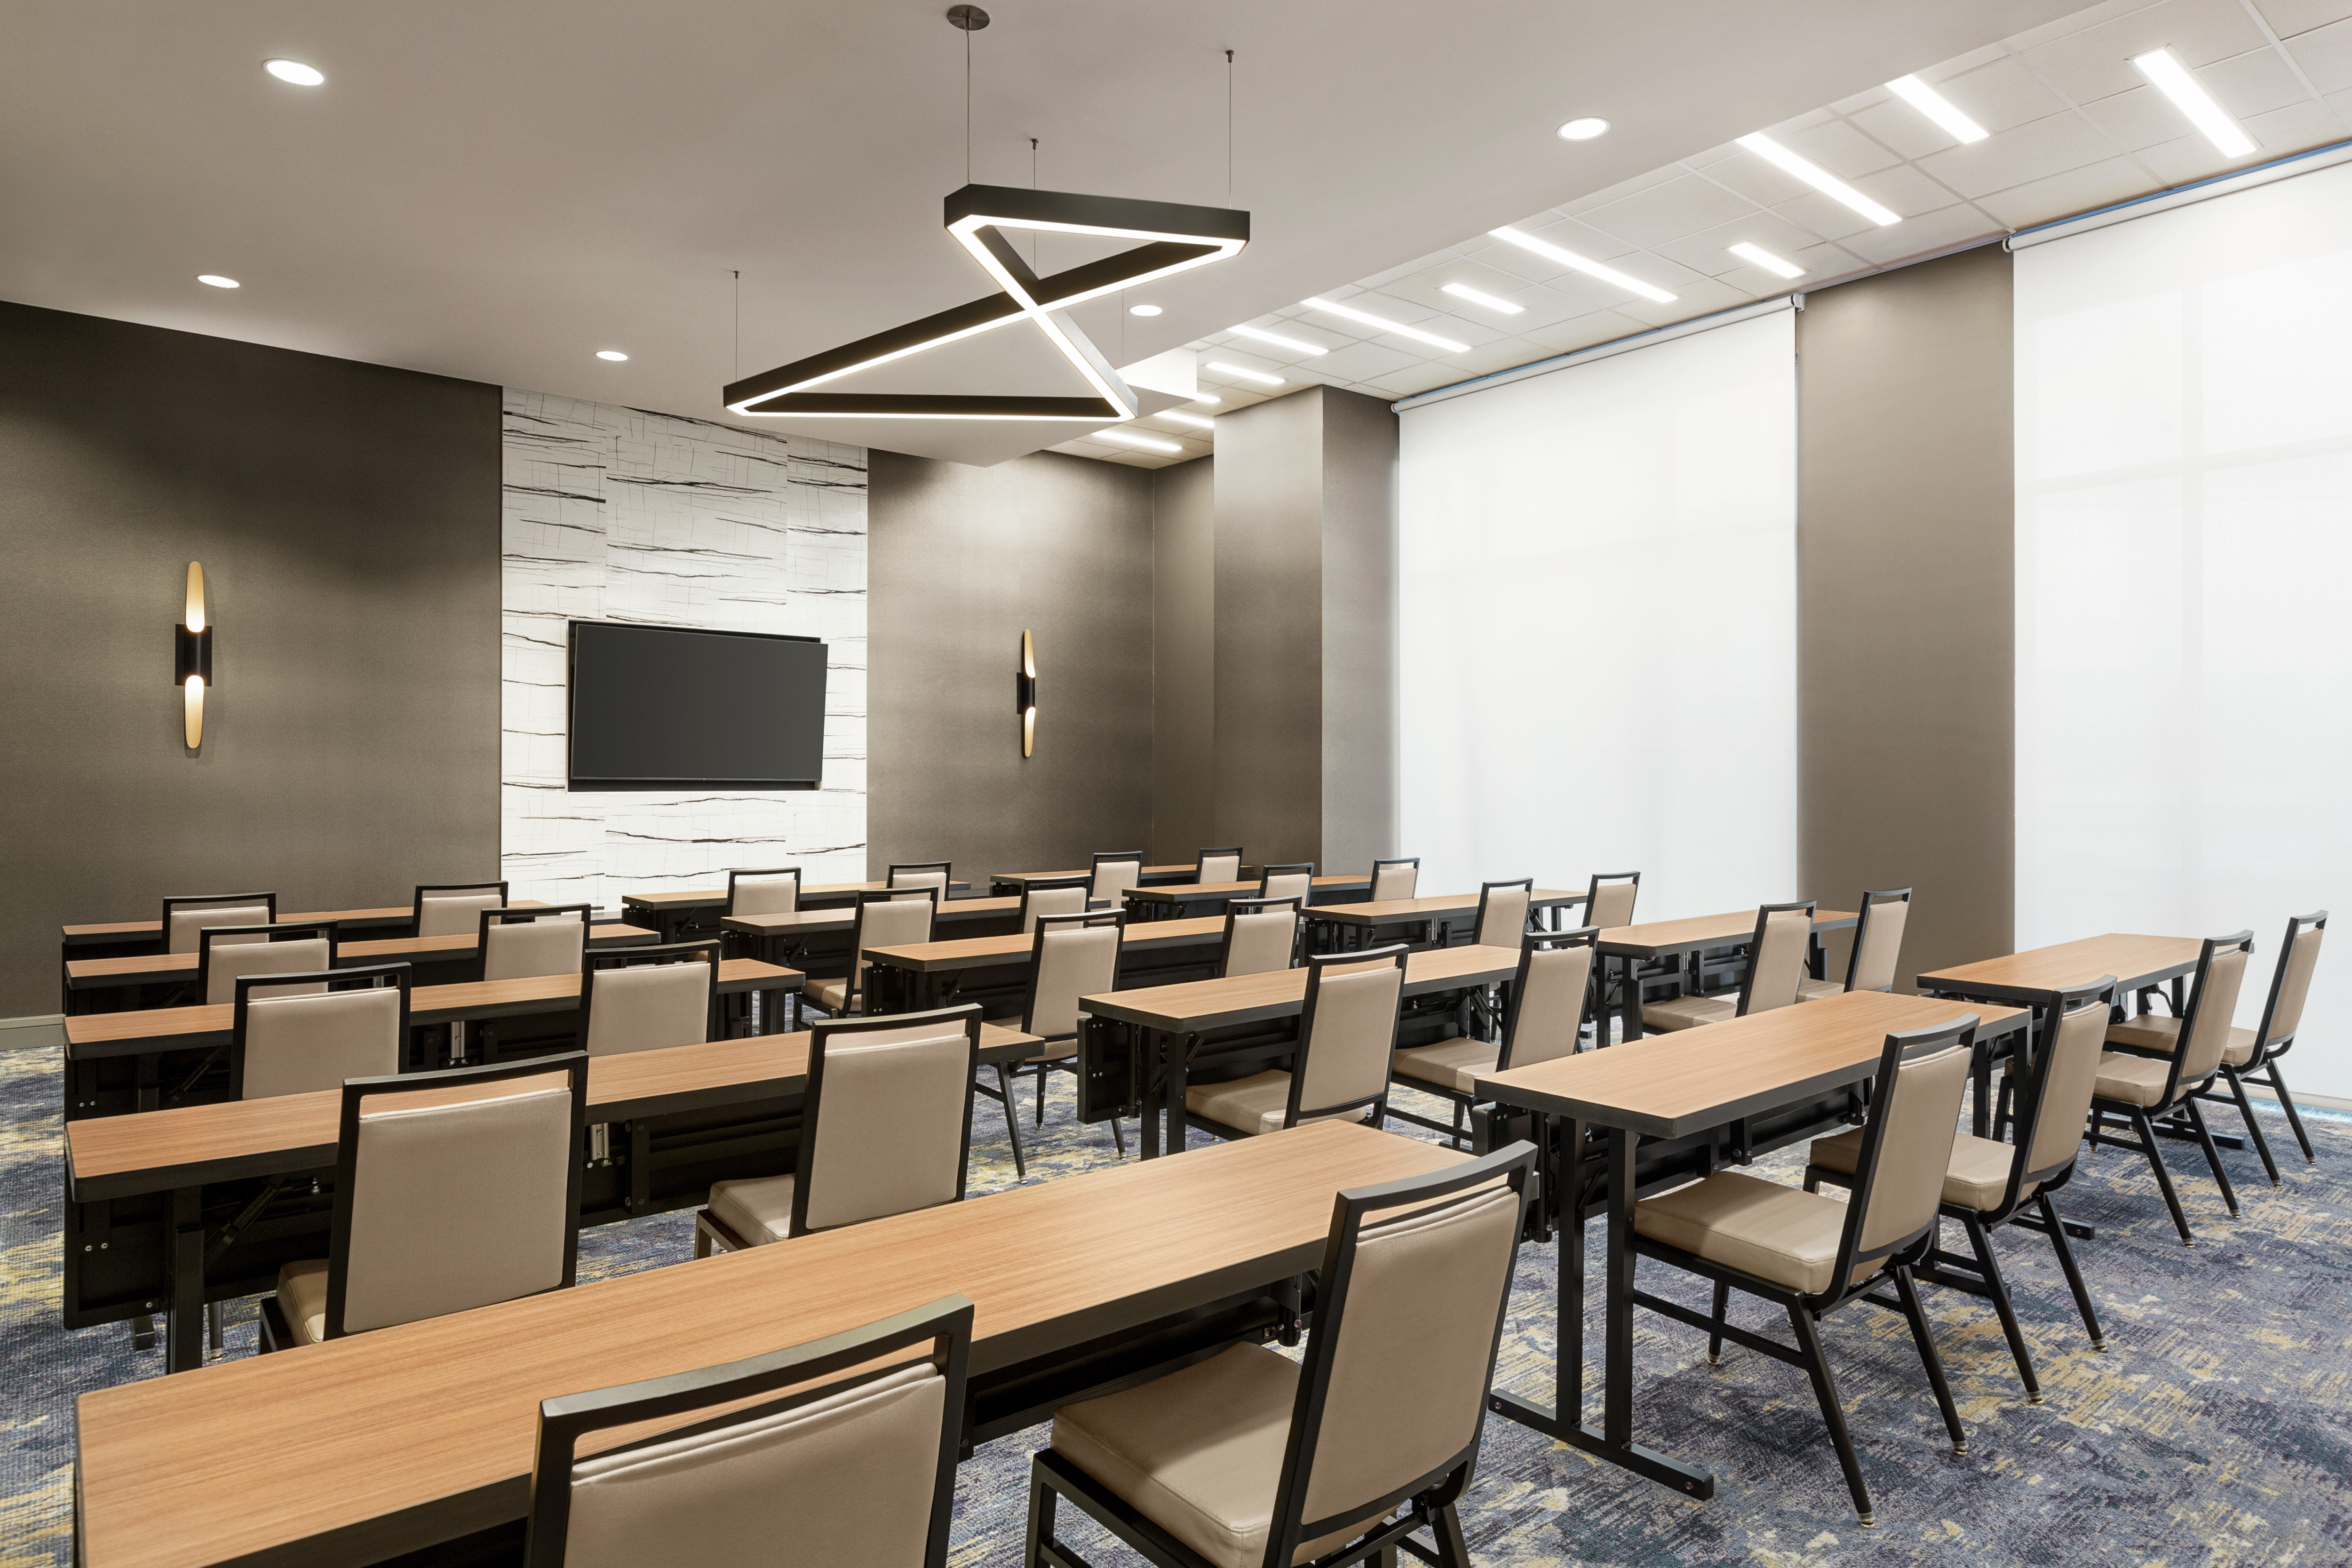  Spacious meeting room featuring classroom style table setup.